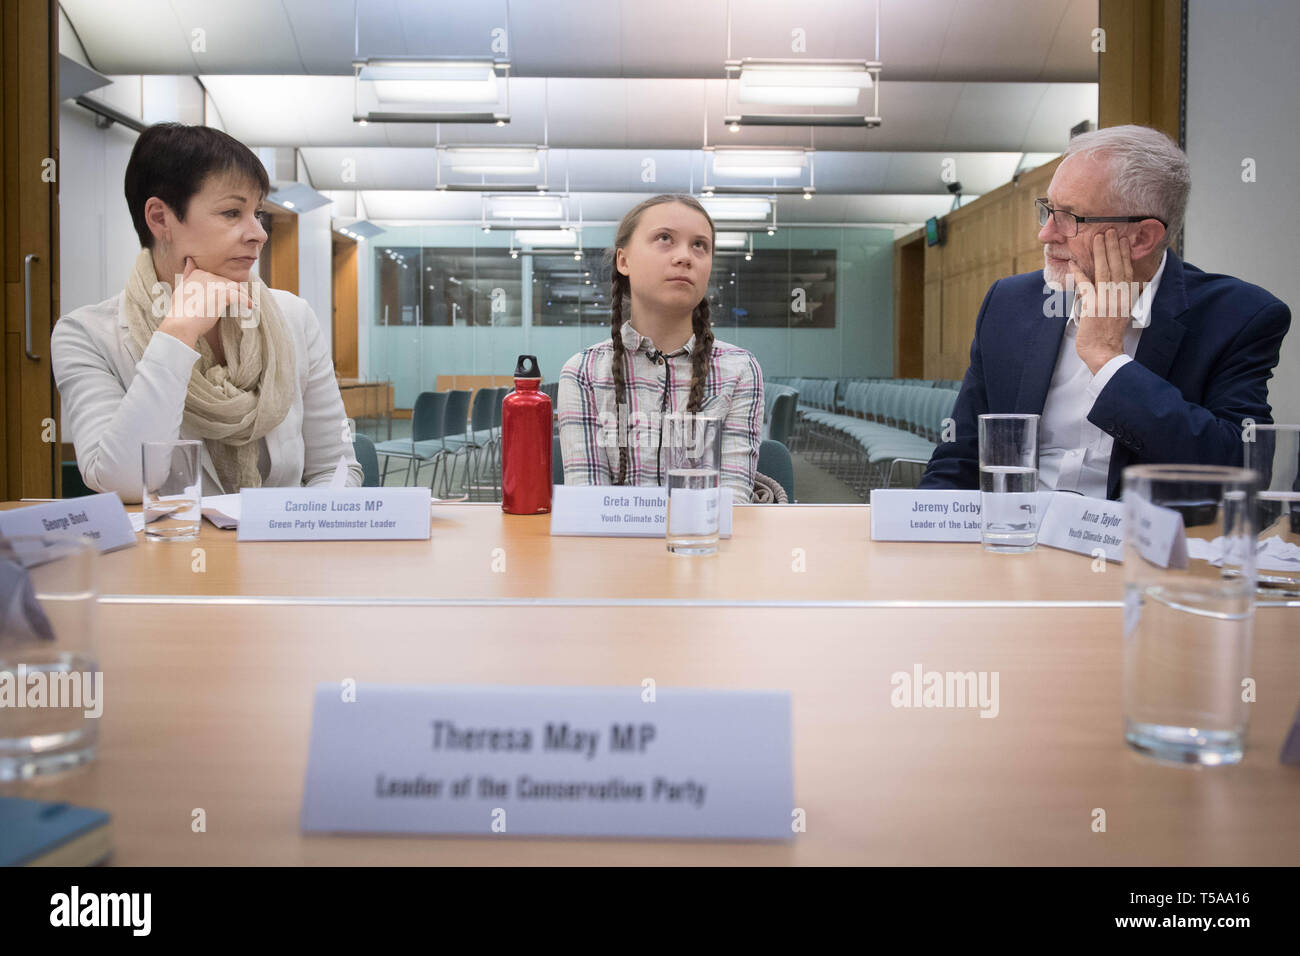 Swedish climate acticist Greta Thunberg meets leaders of the UK political parties at the House of Commons in Westminster, London including Green Party leader Caroline Lucas (left) and Labour leader Jeremy Corbyn (right), a chair was reserved for Theresa May, to discuss the need for cross-party action to address the climate crisis. Stock Photo